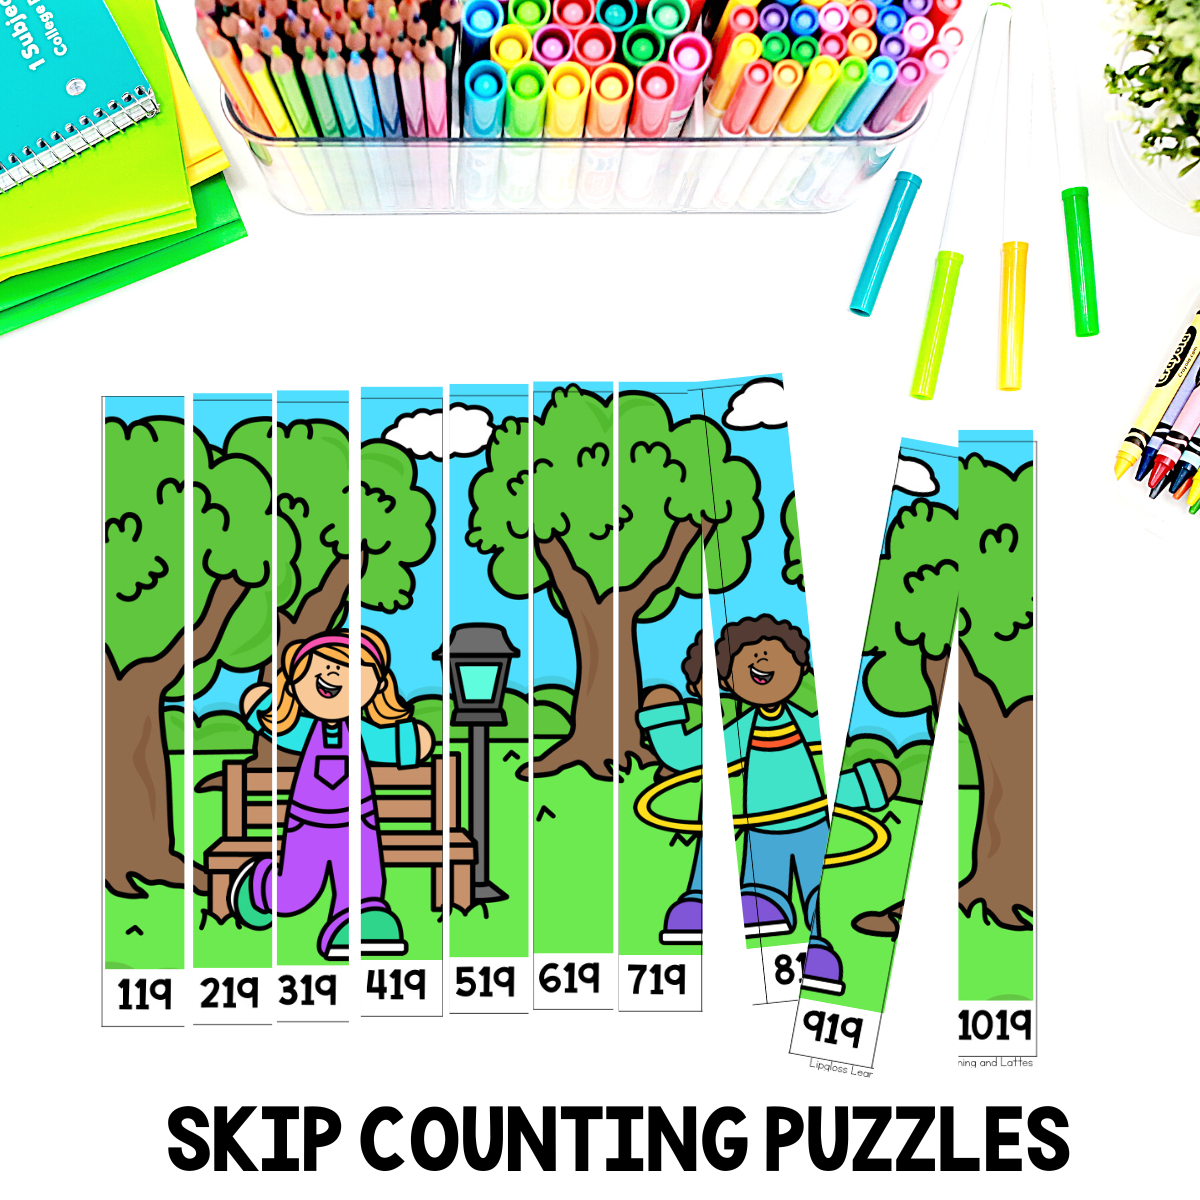 skip-counting-puzzles 